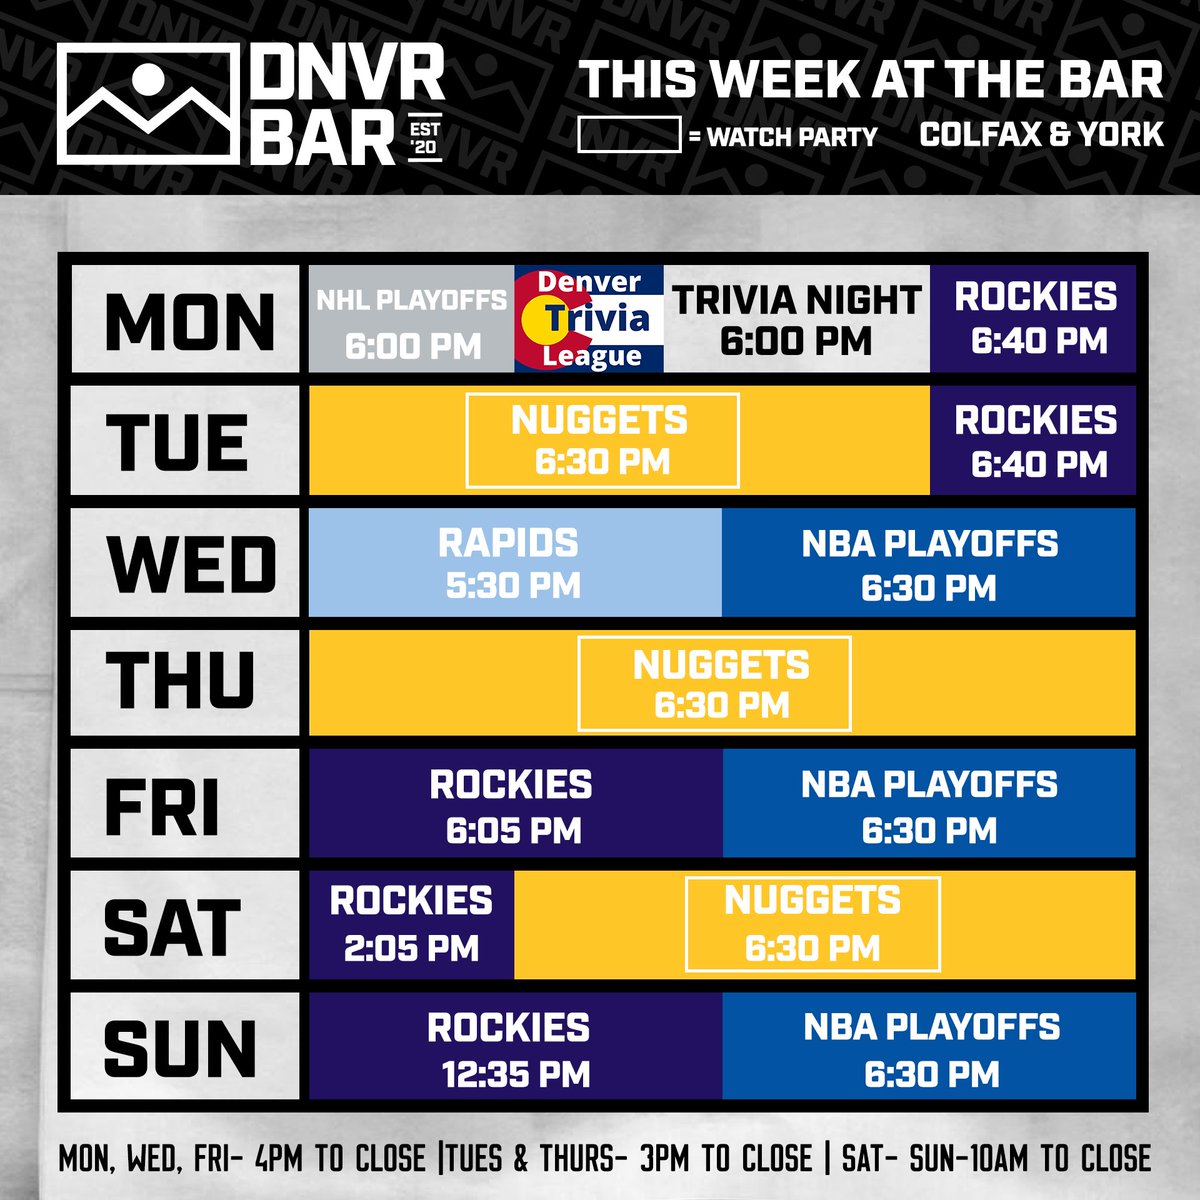 Nuggets in four! Who’s excited for game 3 of the #WesternConferenceFinals? 🏀 Come hang out with host @CocoDavies at the DNVR Bar tomorrow night at 5:30 as she joins our friends at @DNVR_Sports for their @DNVR_Nuggets Pregame Show. You don’t want to miss it. #MileHighBasketball